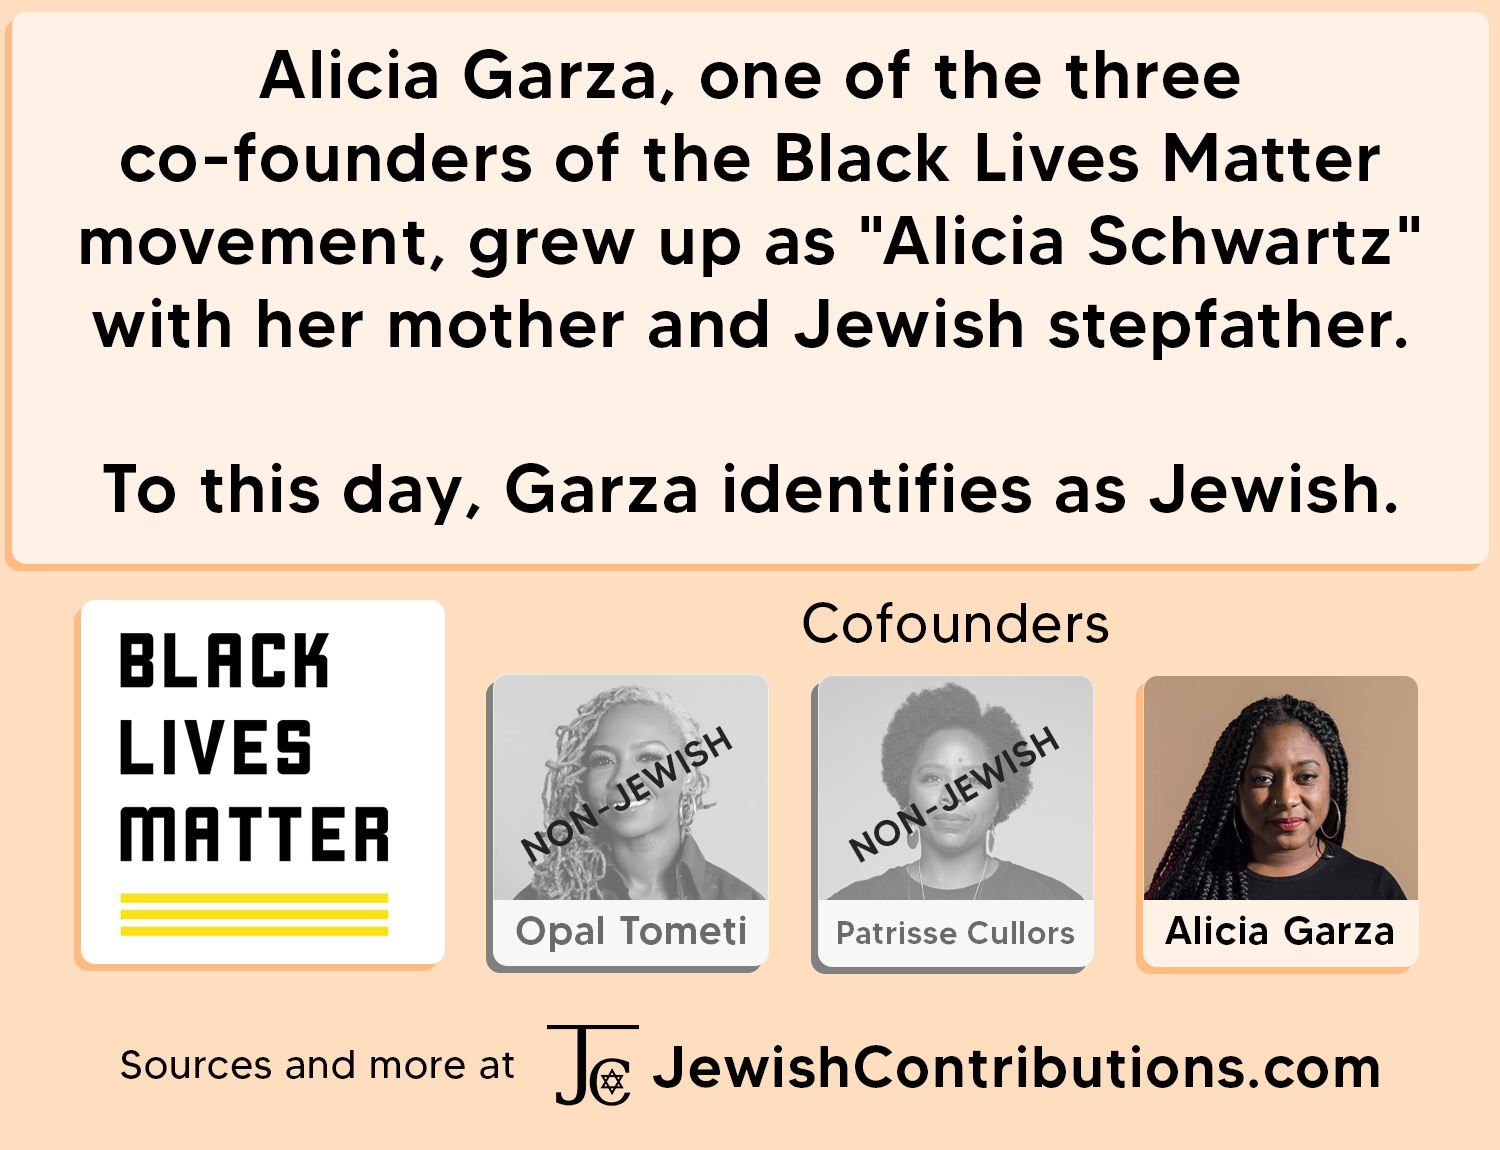 Meet Alicia Garza, the cofounder of Black Lives Matter who was raised Jewish.